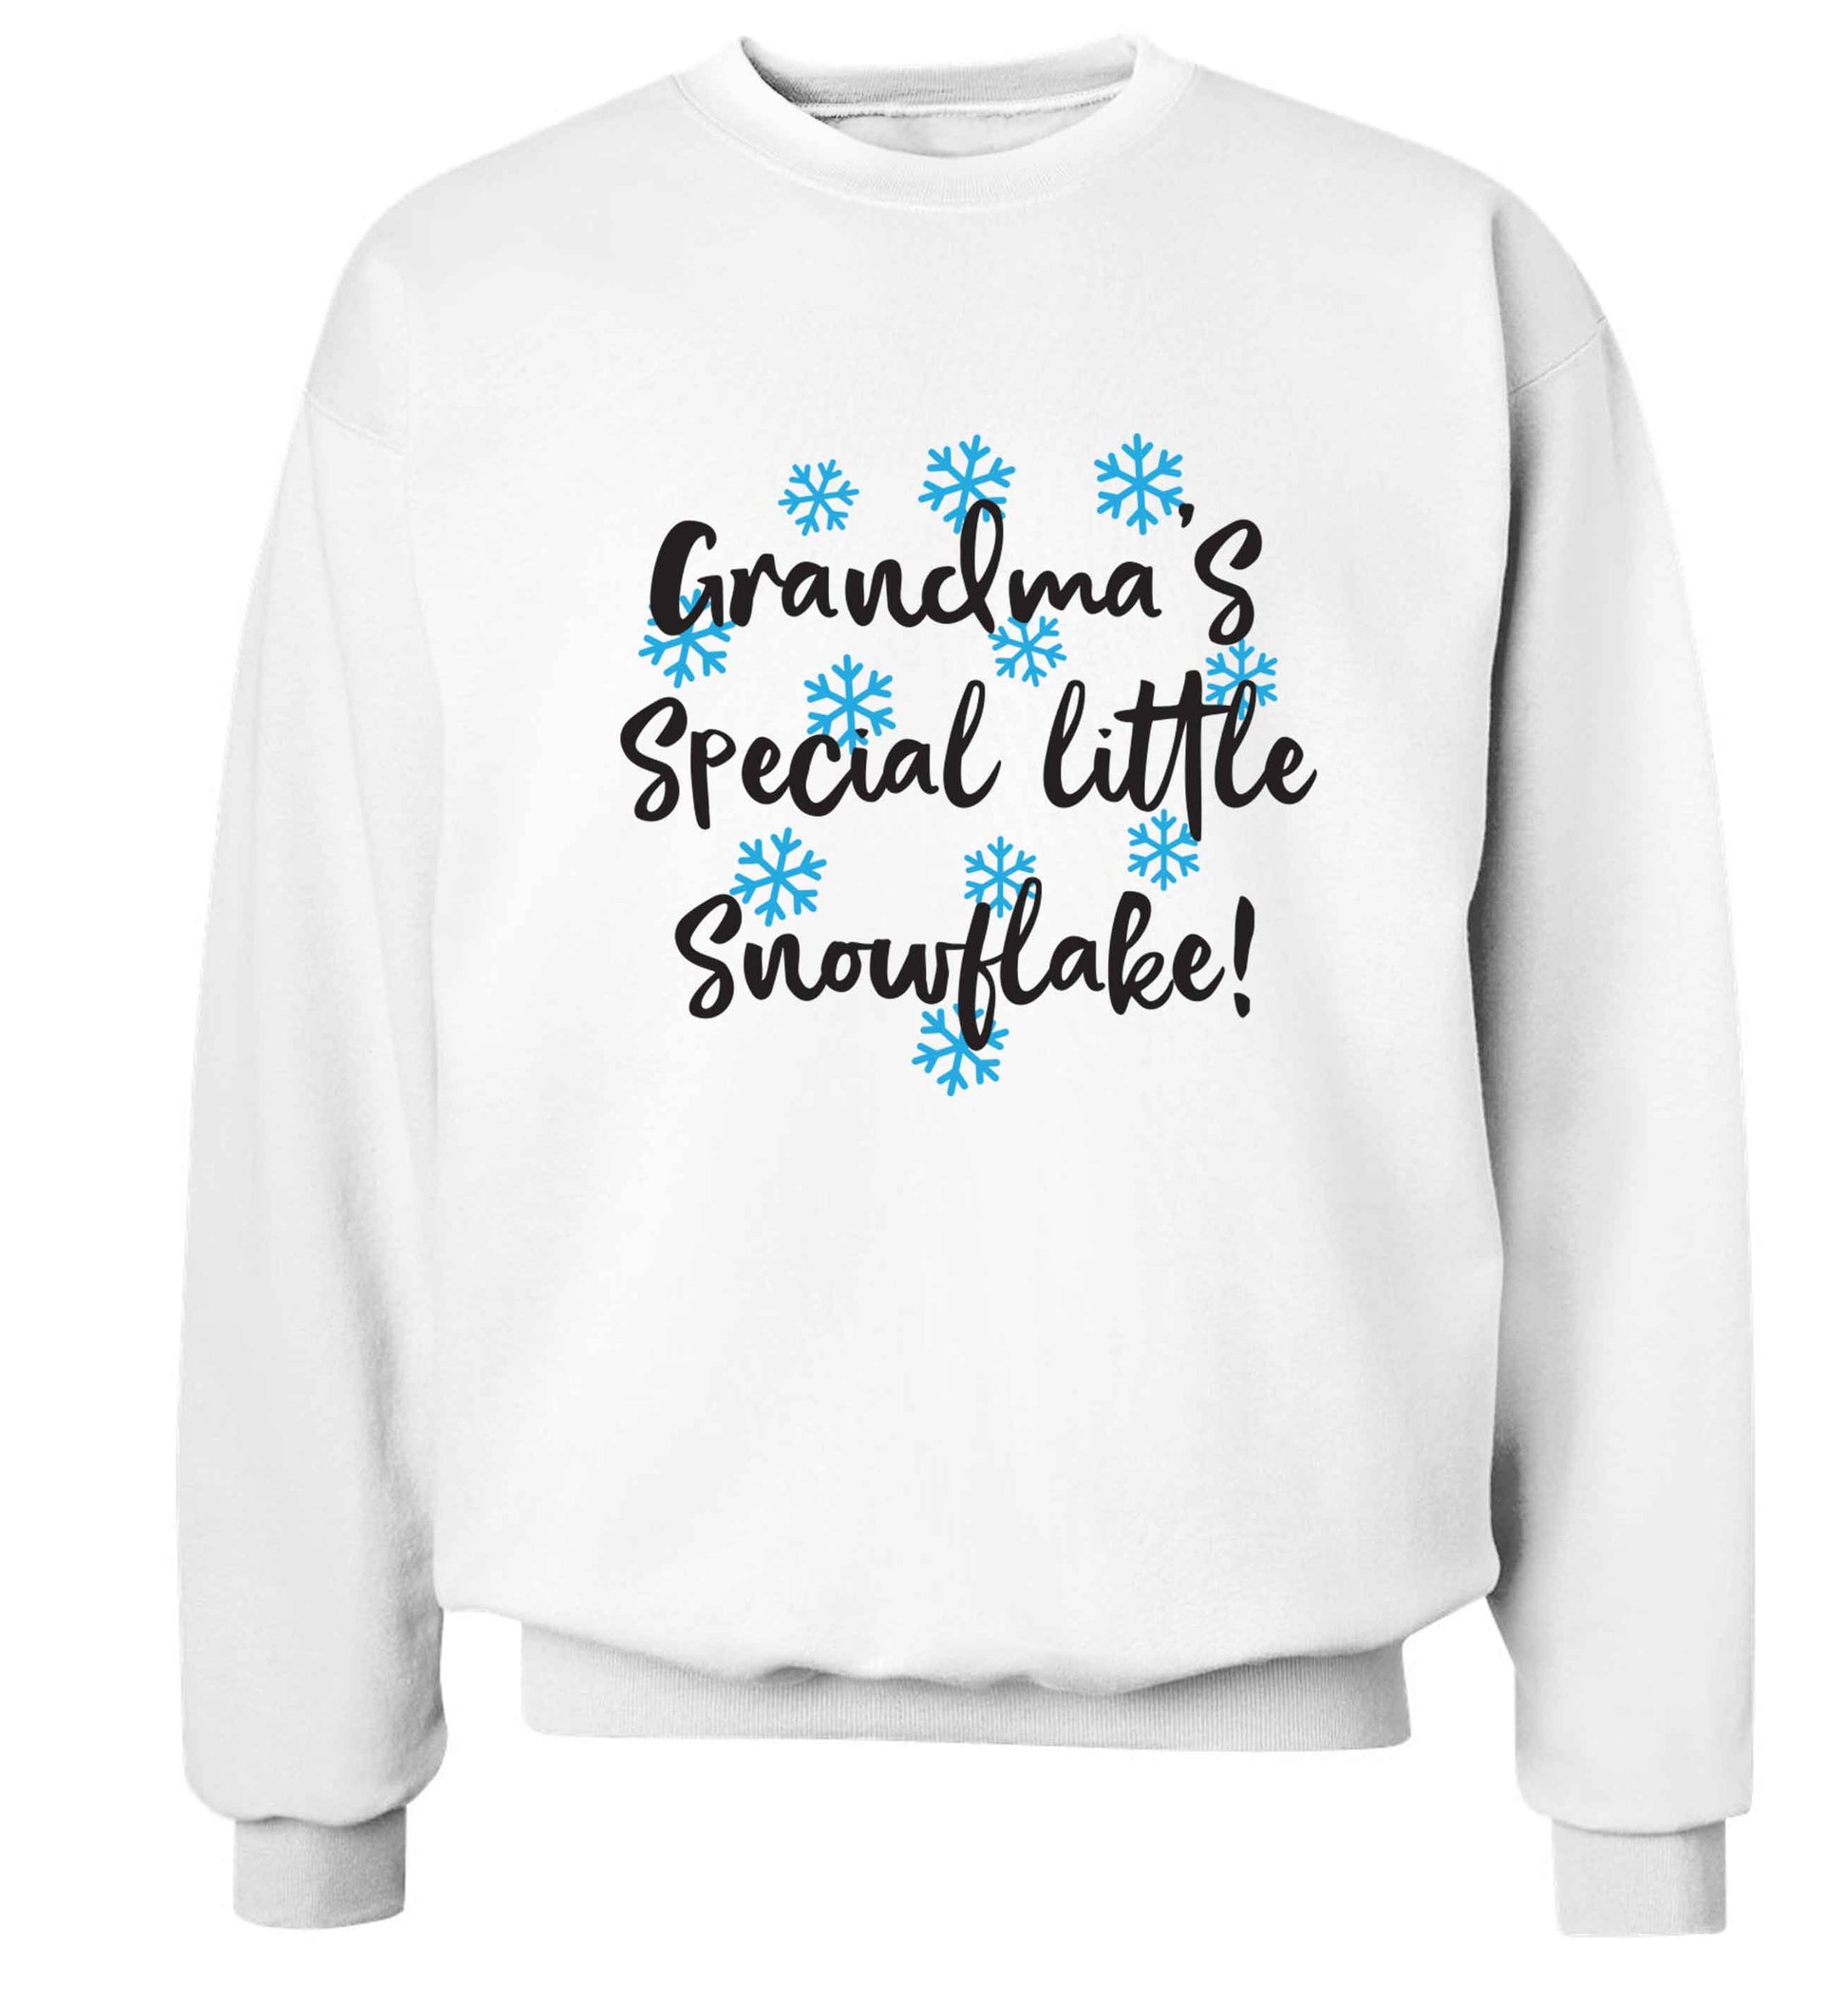 Grandma's special little snowflake Adult's unisex white Sweater 2XL